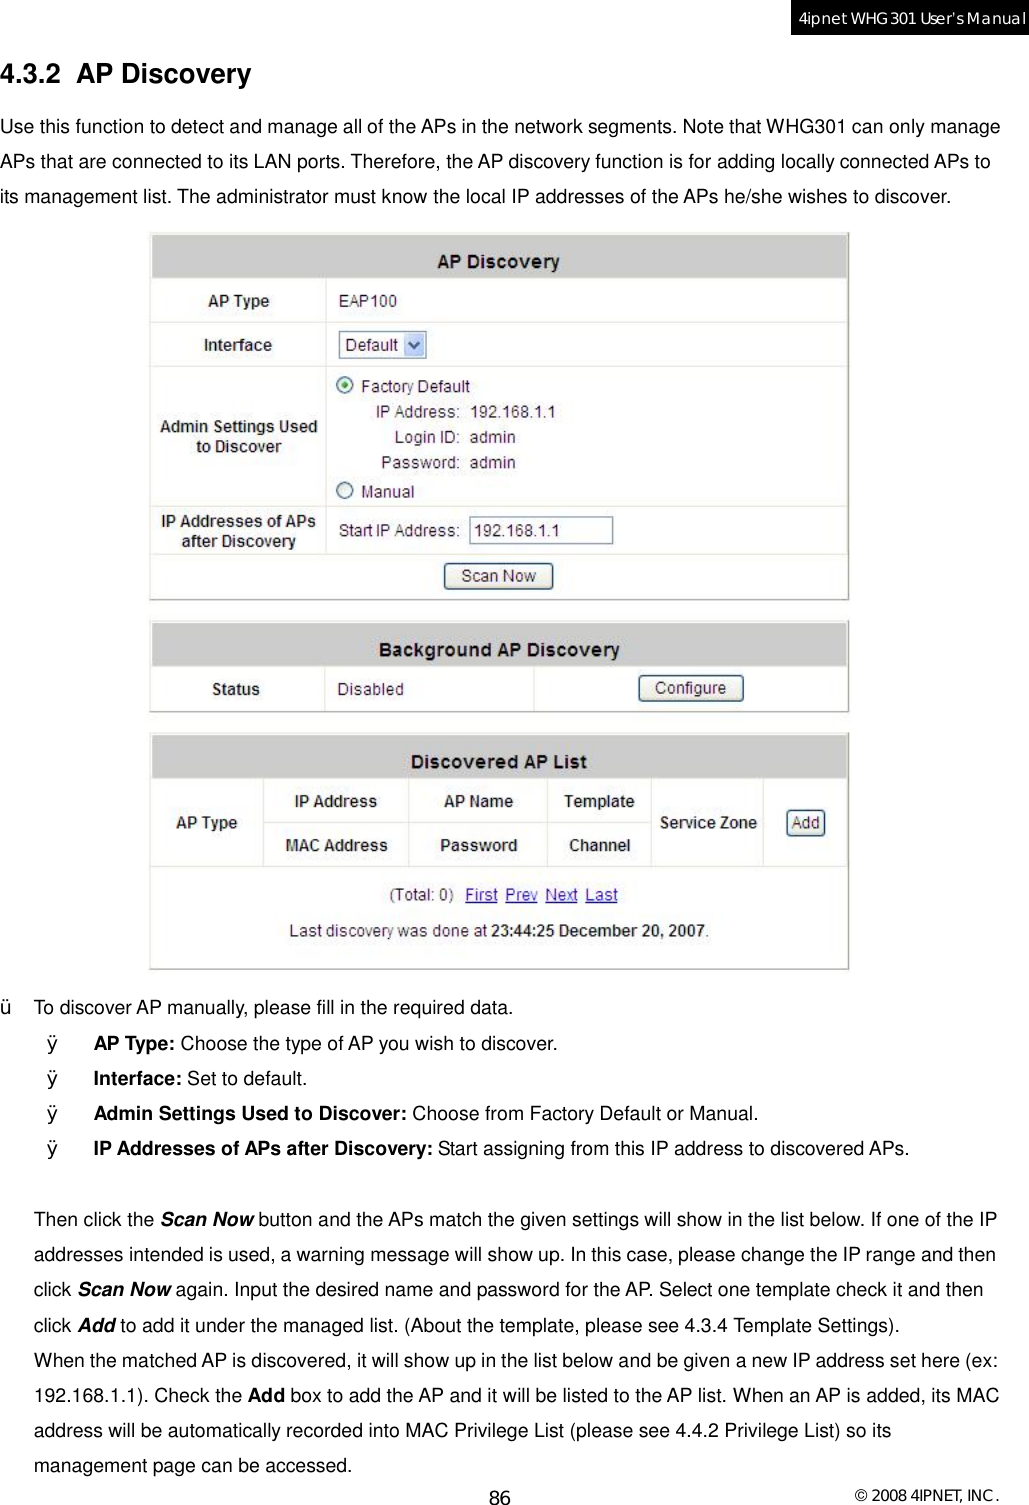  © 2008 4IPNET, INC. 86 4ipnet WHG301 User’s Manual  4.3.2 AP Discovery Use this function to detect and manage all of the APs in the network segments. Note that WHG301 can only manage APs that are connected to its LAN ports. Therefore, the AP discovery function is for adding locally connected APs to its management list. The administrator must know the local IP addresses of the APs he/she wishes to discover.  Ÿ  To discover AP manually, please fill in the required data. Ø  AP Type: Choose the type of AP you wish to discover. Ø  Interface: Set to default. Ø  Admin Settings Used to Discover: Choose from Factory Default or Manual. Ø  IP Addresses of APs after Discovery: Start assigning from this IP address to discovered APs.  Then click the Scan Now button and the APs match the given settings will show in the list below. If one of the IP addresses intended is used, a warning message will show up. In this case, please change the IP range and then click Scan Now again. Input the desired name and password for the AP. Select one template check it and then click Add to add it under the managed list. (About the template, please see 4.3.4 Template Settings). When the matched AP is discovered, it will show up in the list below and be given a new IP address set here (ex: 192.168.1.1). Check the Add box to add the AP and it will be listed to the AP list. When an AP is added, its MAC address will be automatically recorded into MAC Privilege List (please see 4.4.2 Privilege List) so its management page can be accessed.  